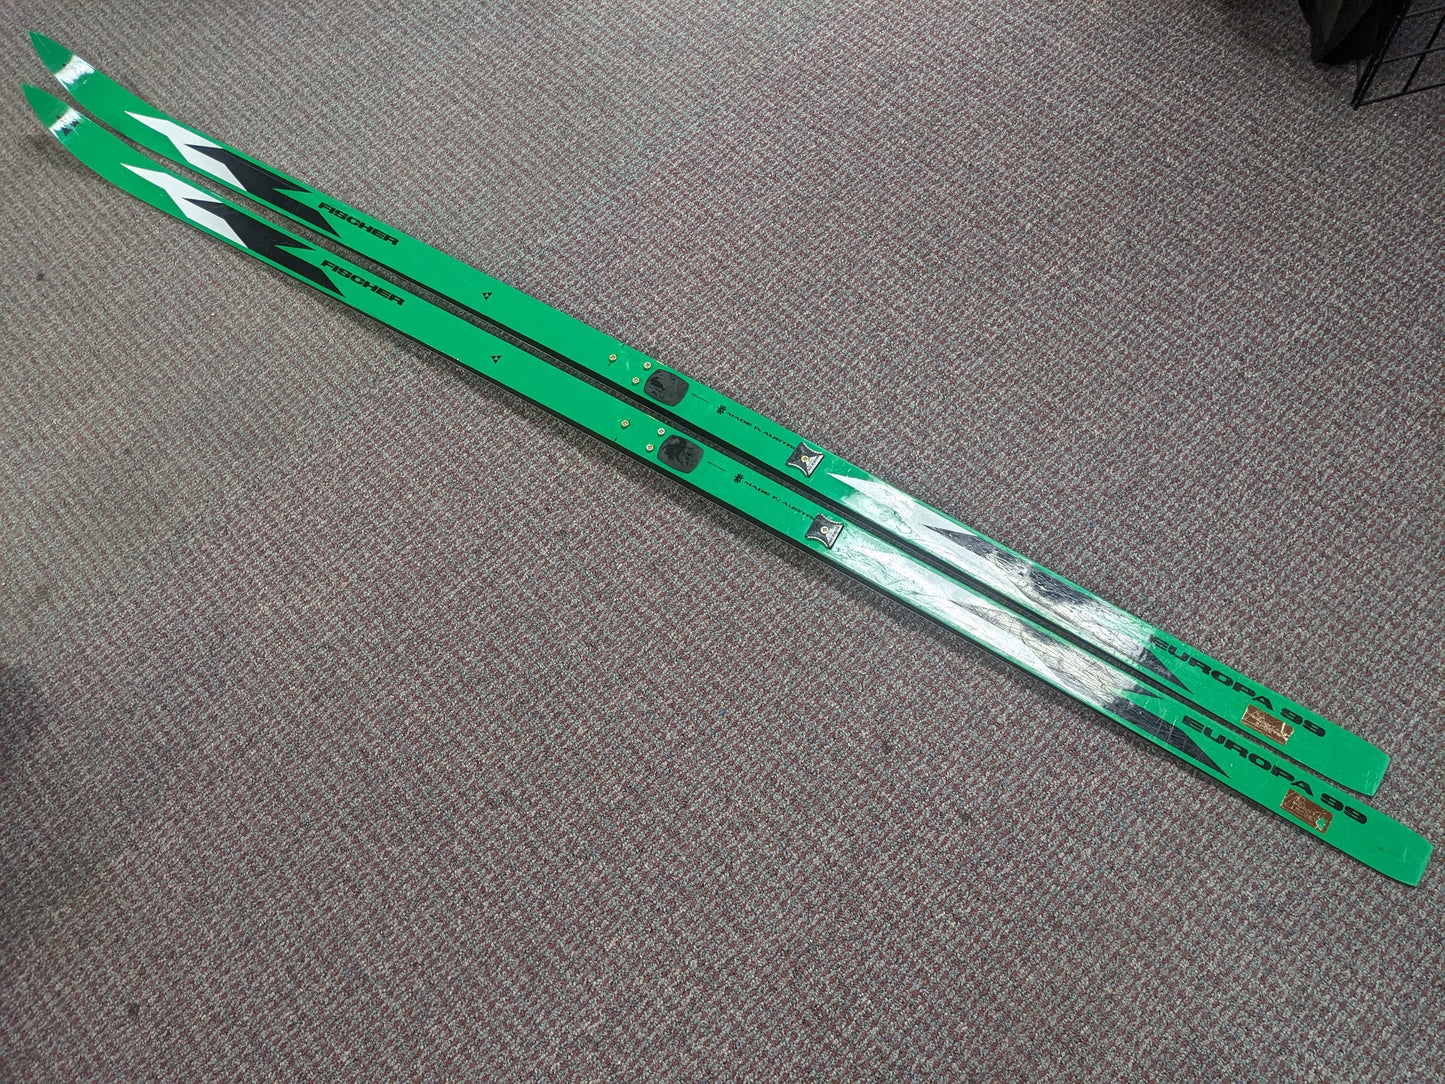 Fischer Europa Cross Country XC Skis w/75 mm 3 Pin Bindings Size 215 Cm Color Green Condition Used